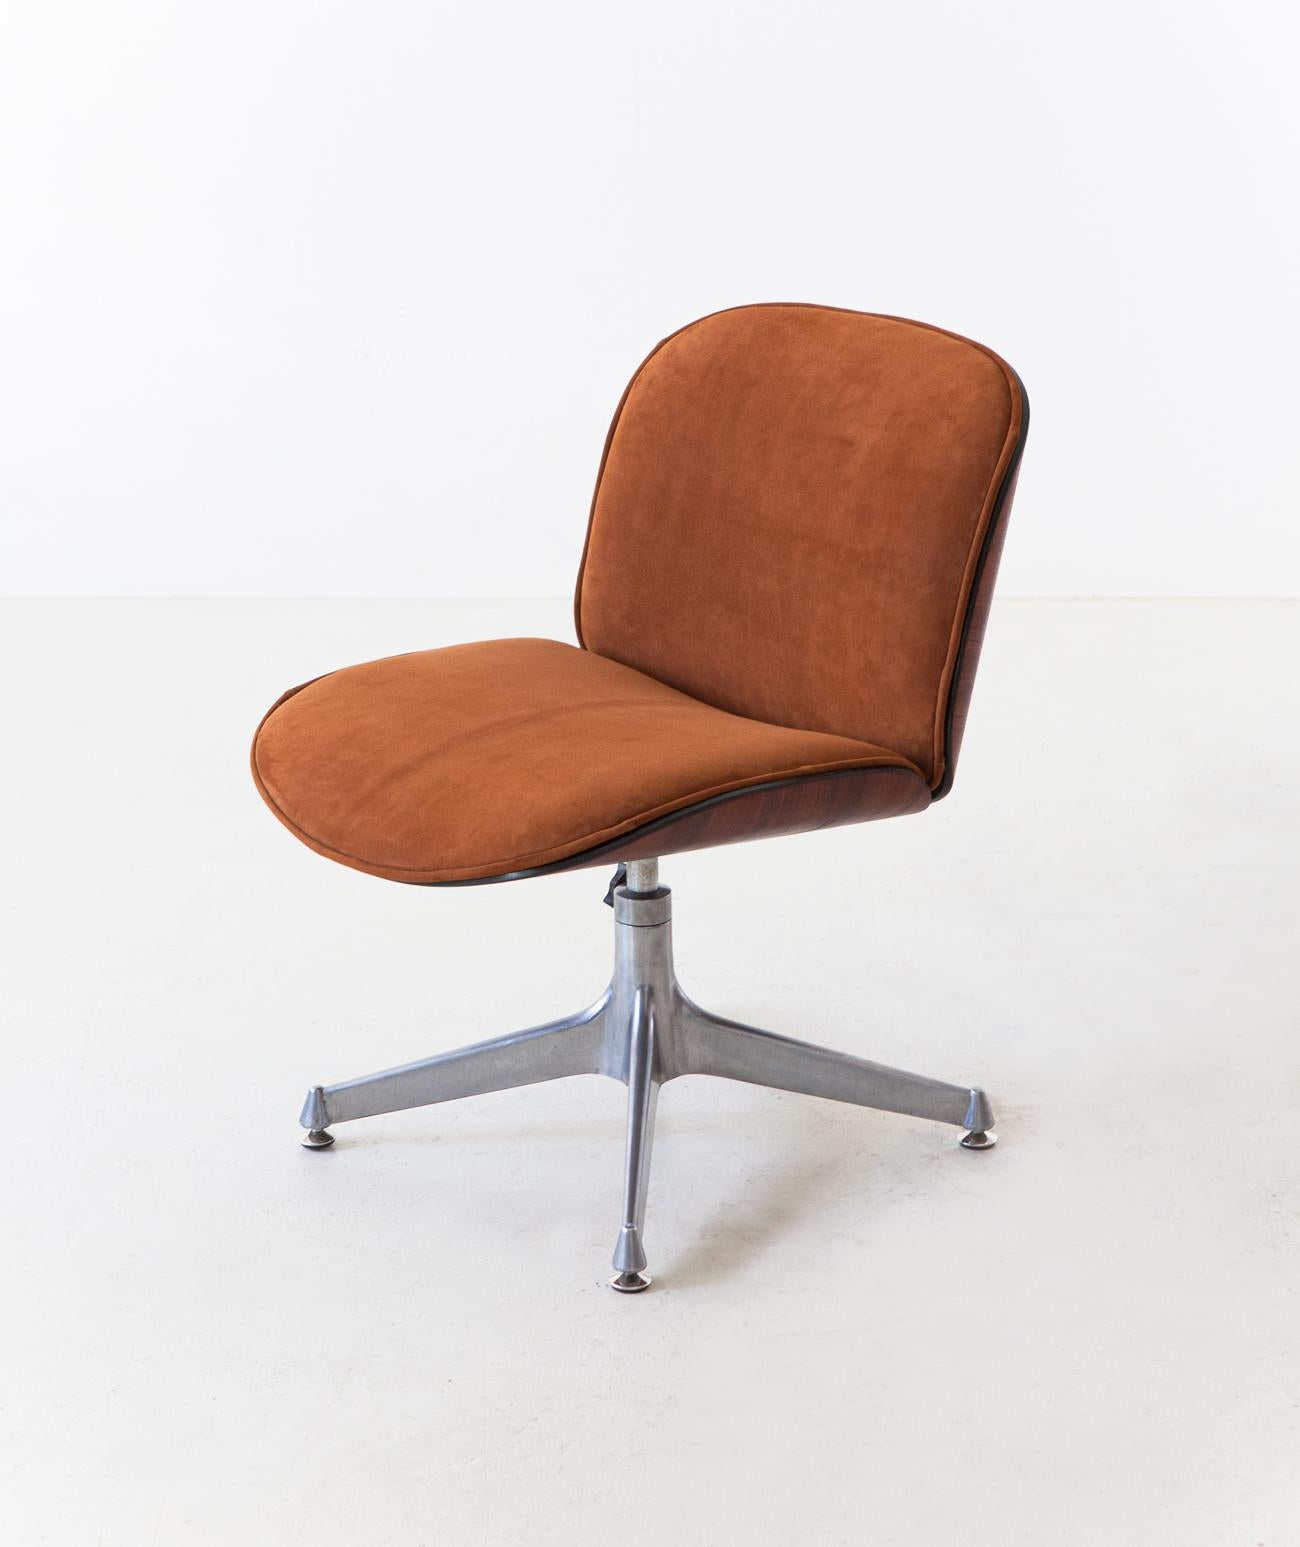 Mid-20th Century Desk Chair by Ico Parisi for Mim,  Exotic Wood and Suede Leather